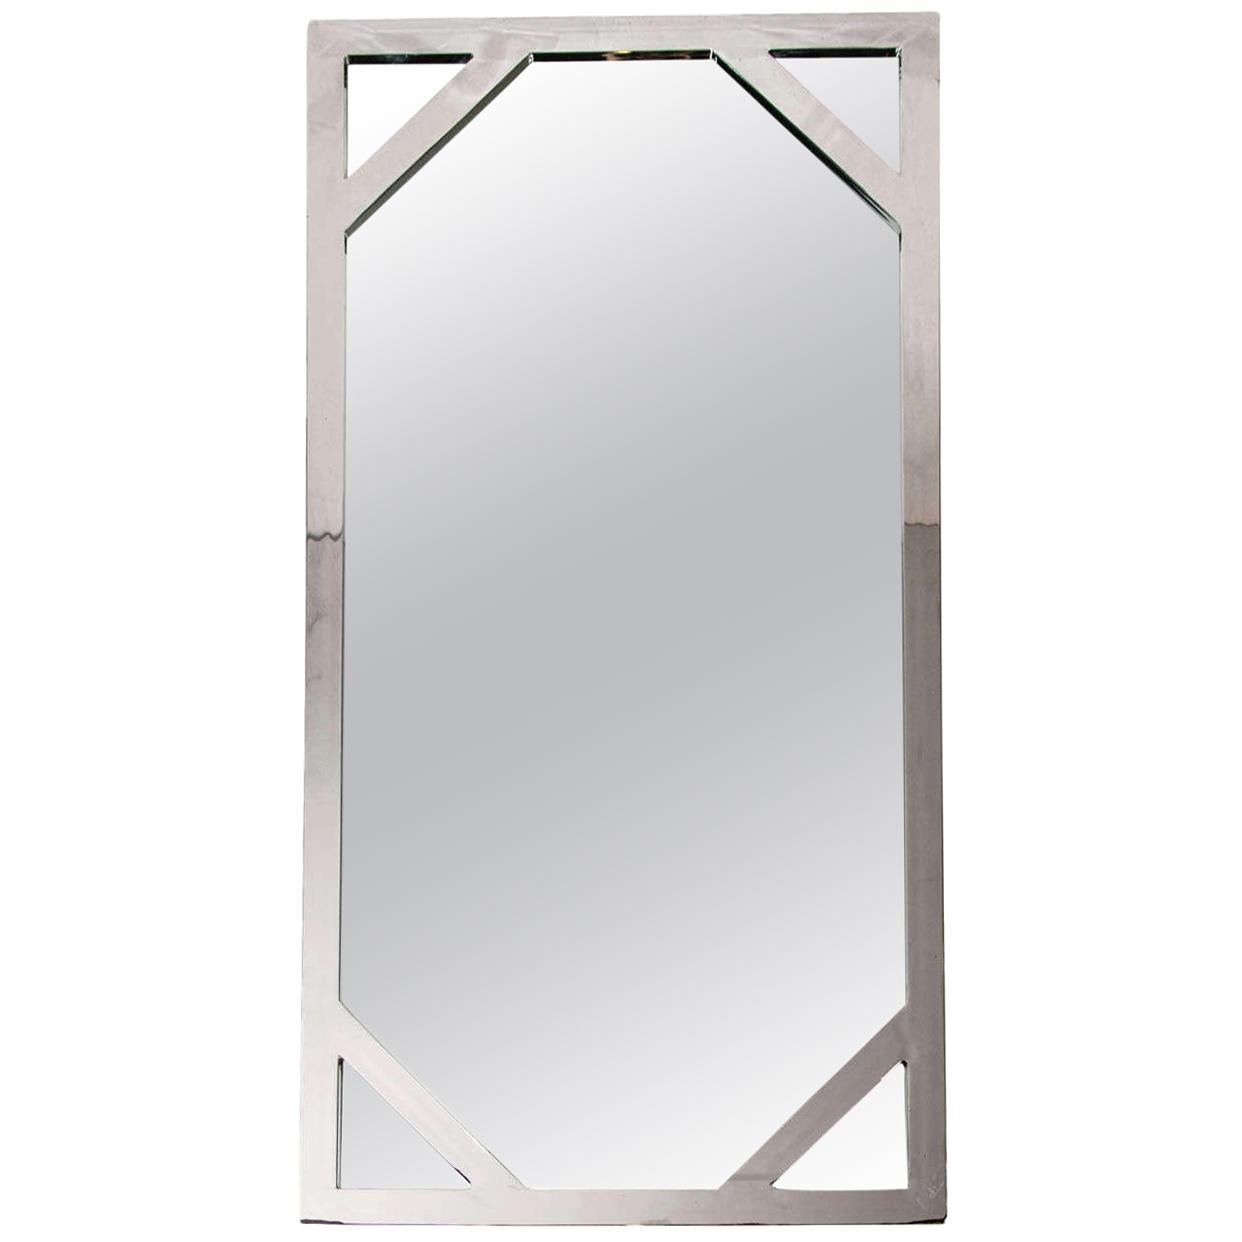 Mid-Century Modern rectangular mirror in solid steel with a chrome finish, attributed to Milo Baughman for D.I.A.. The minimalist mirror has a lattice design along the corners, reminiscent of 1970s Chinese Chippendale designs. 
Please note the